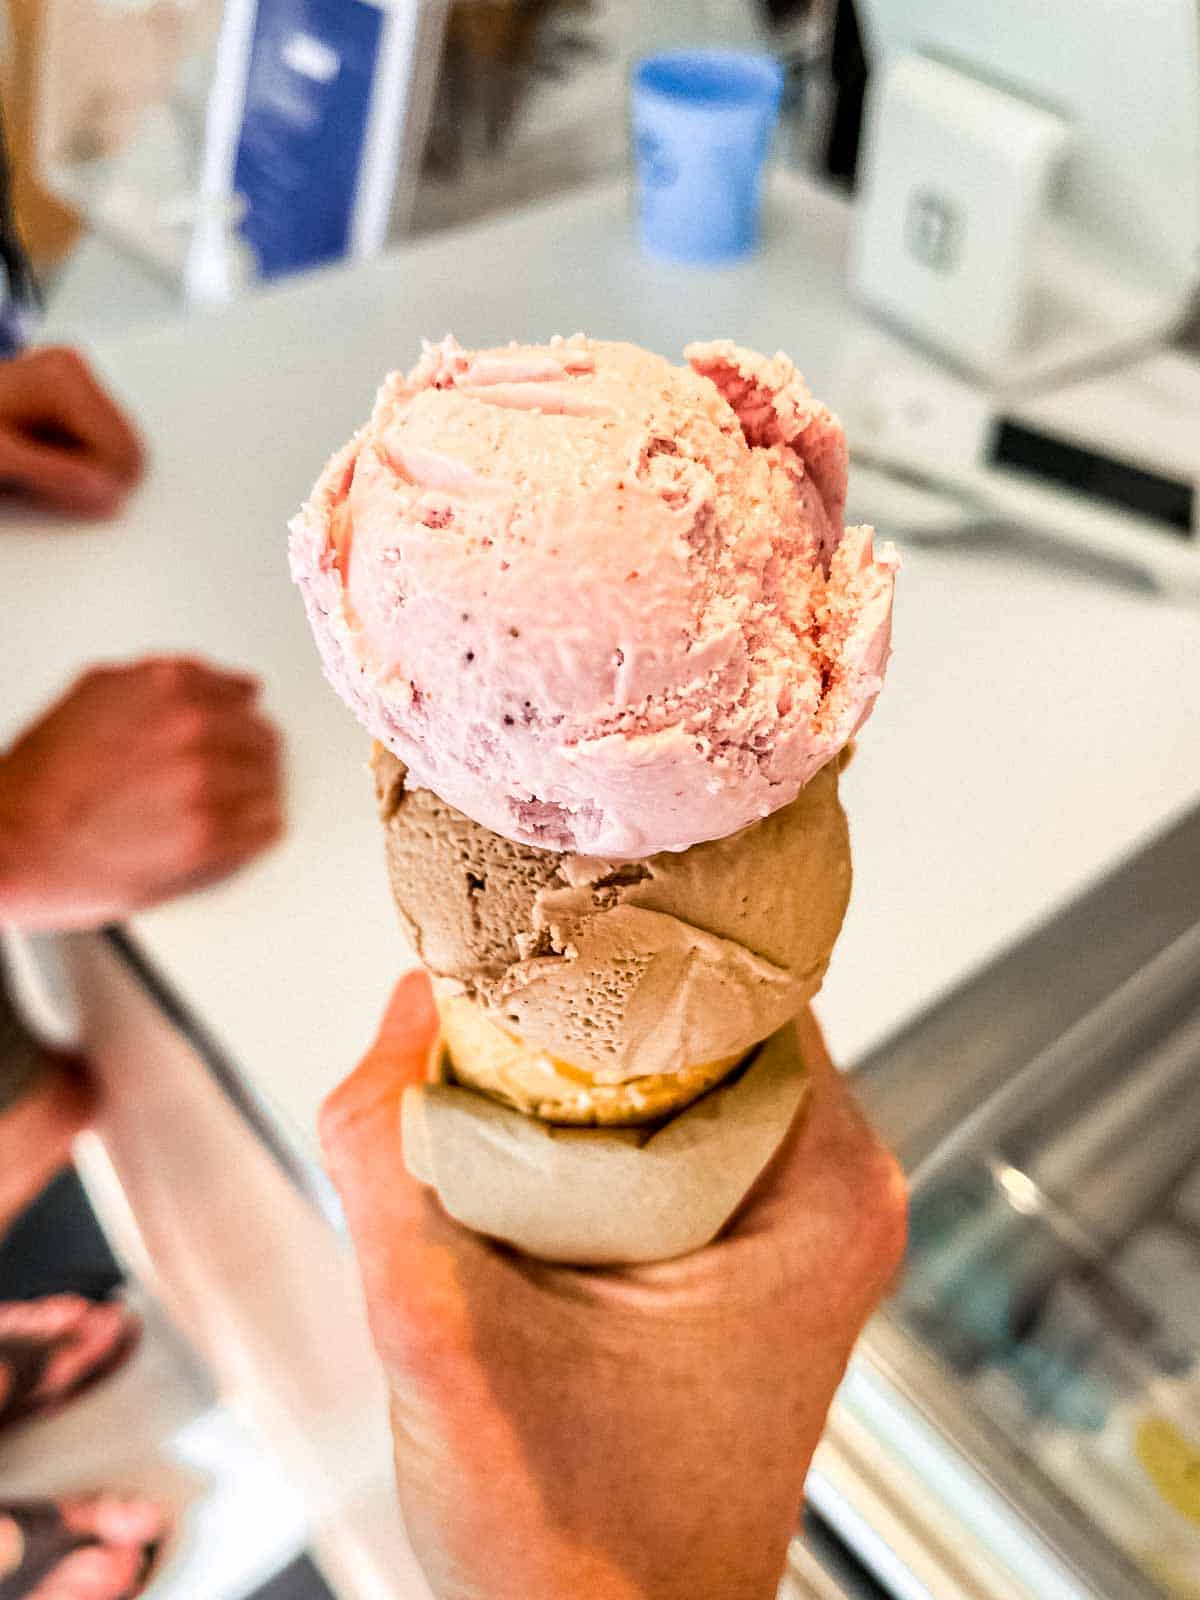 25 Best Vegan Restaurants in Vancouver BC for 2023 - double scoop strawberry and mint chocolate ice cream from Say Hello Sweets